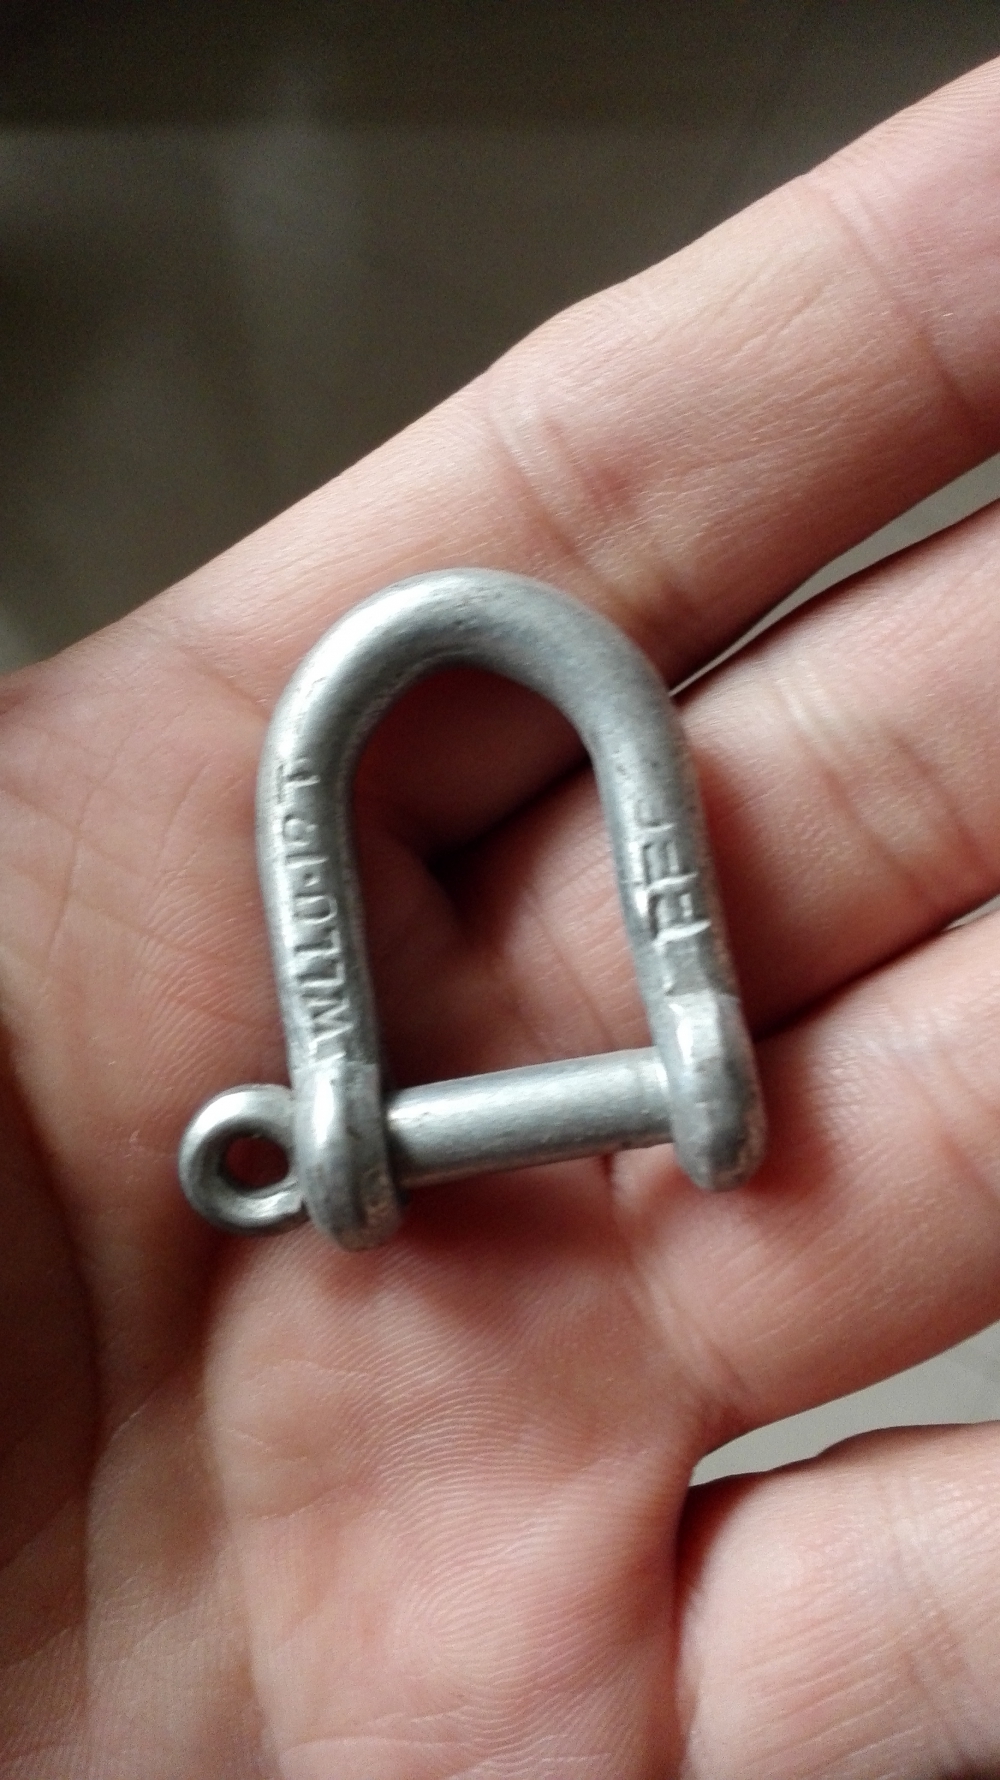 Forged Long D Shackle with safety Nut